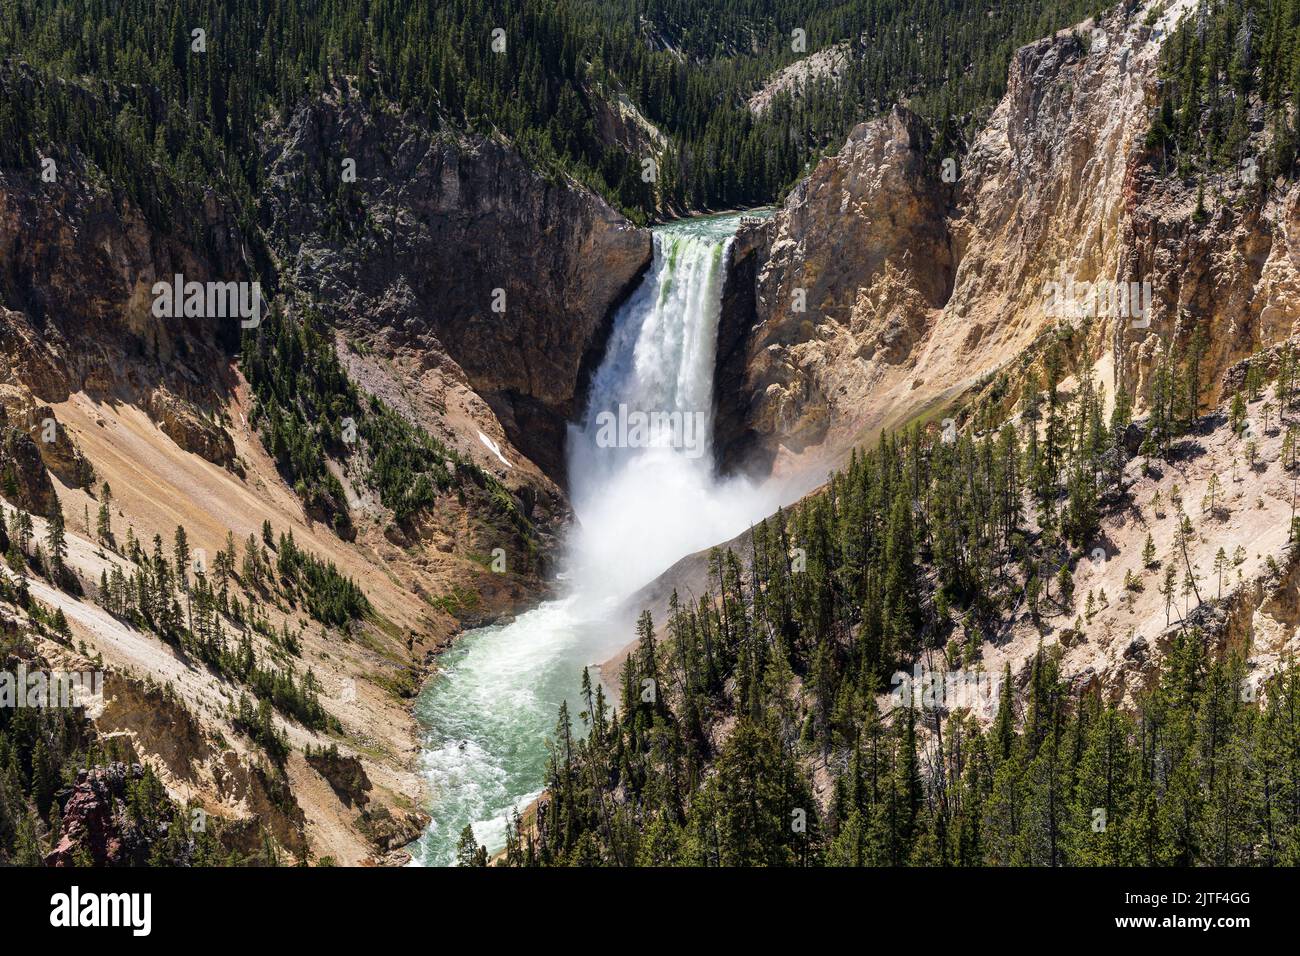 Lower Falls of the Yellowstone River crashing into the canyon, Yellowstone National Park, Wyoming, USA Stock Photo